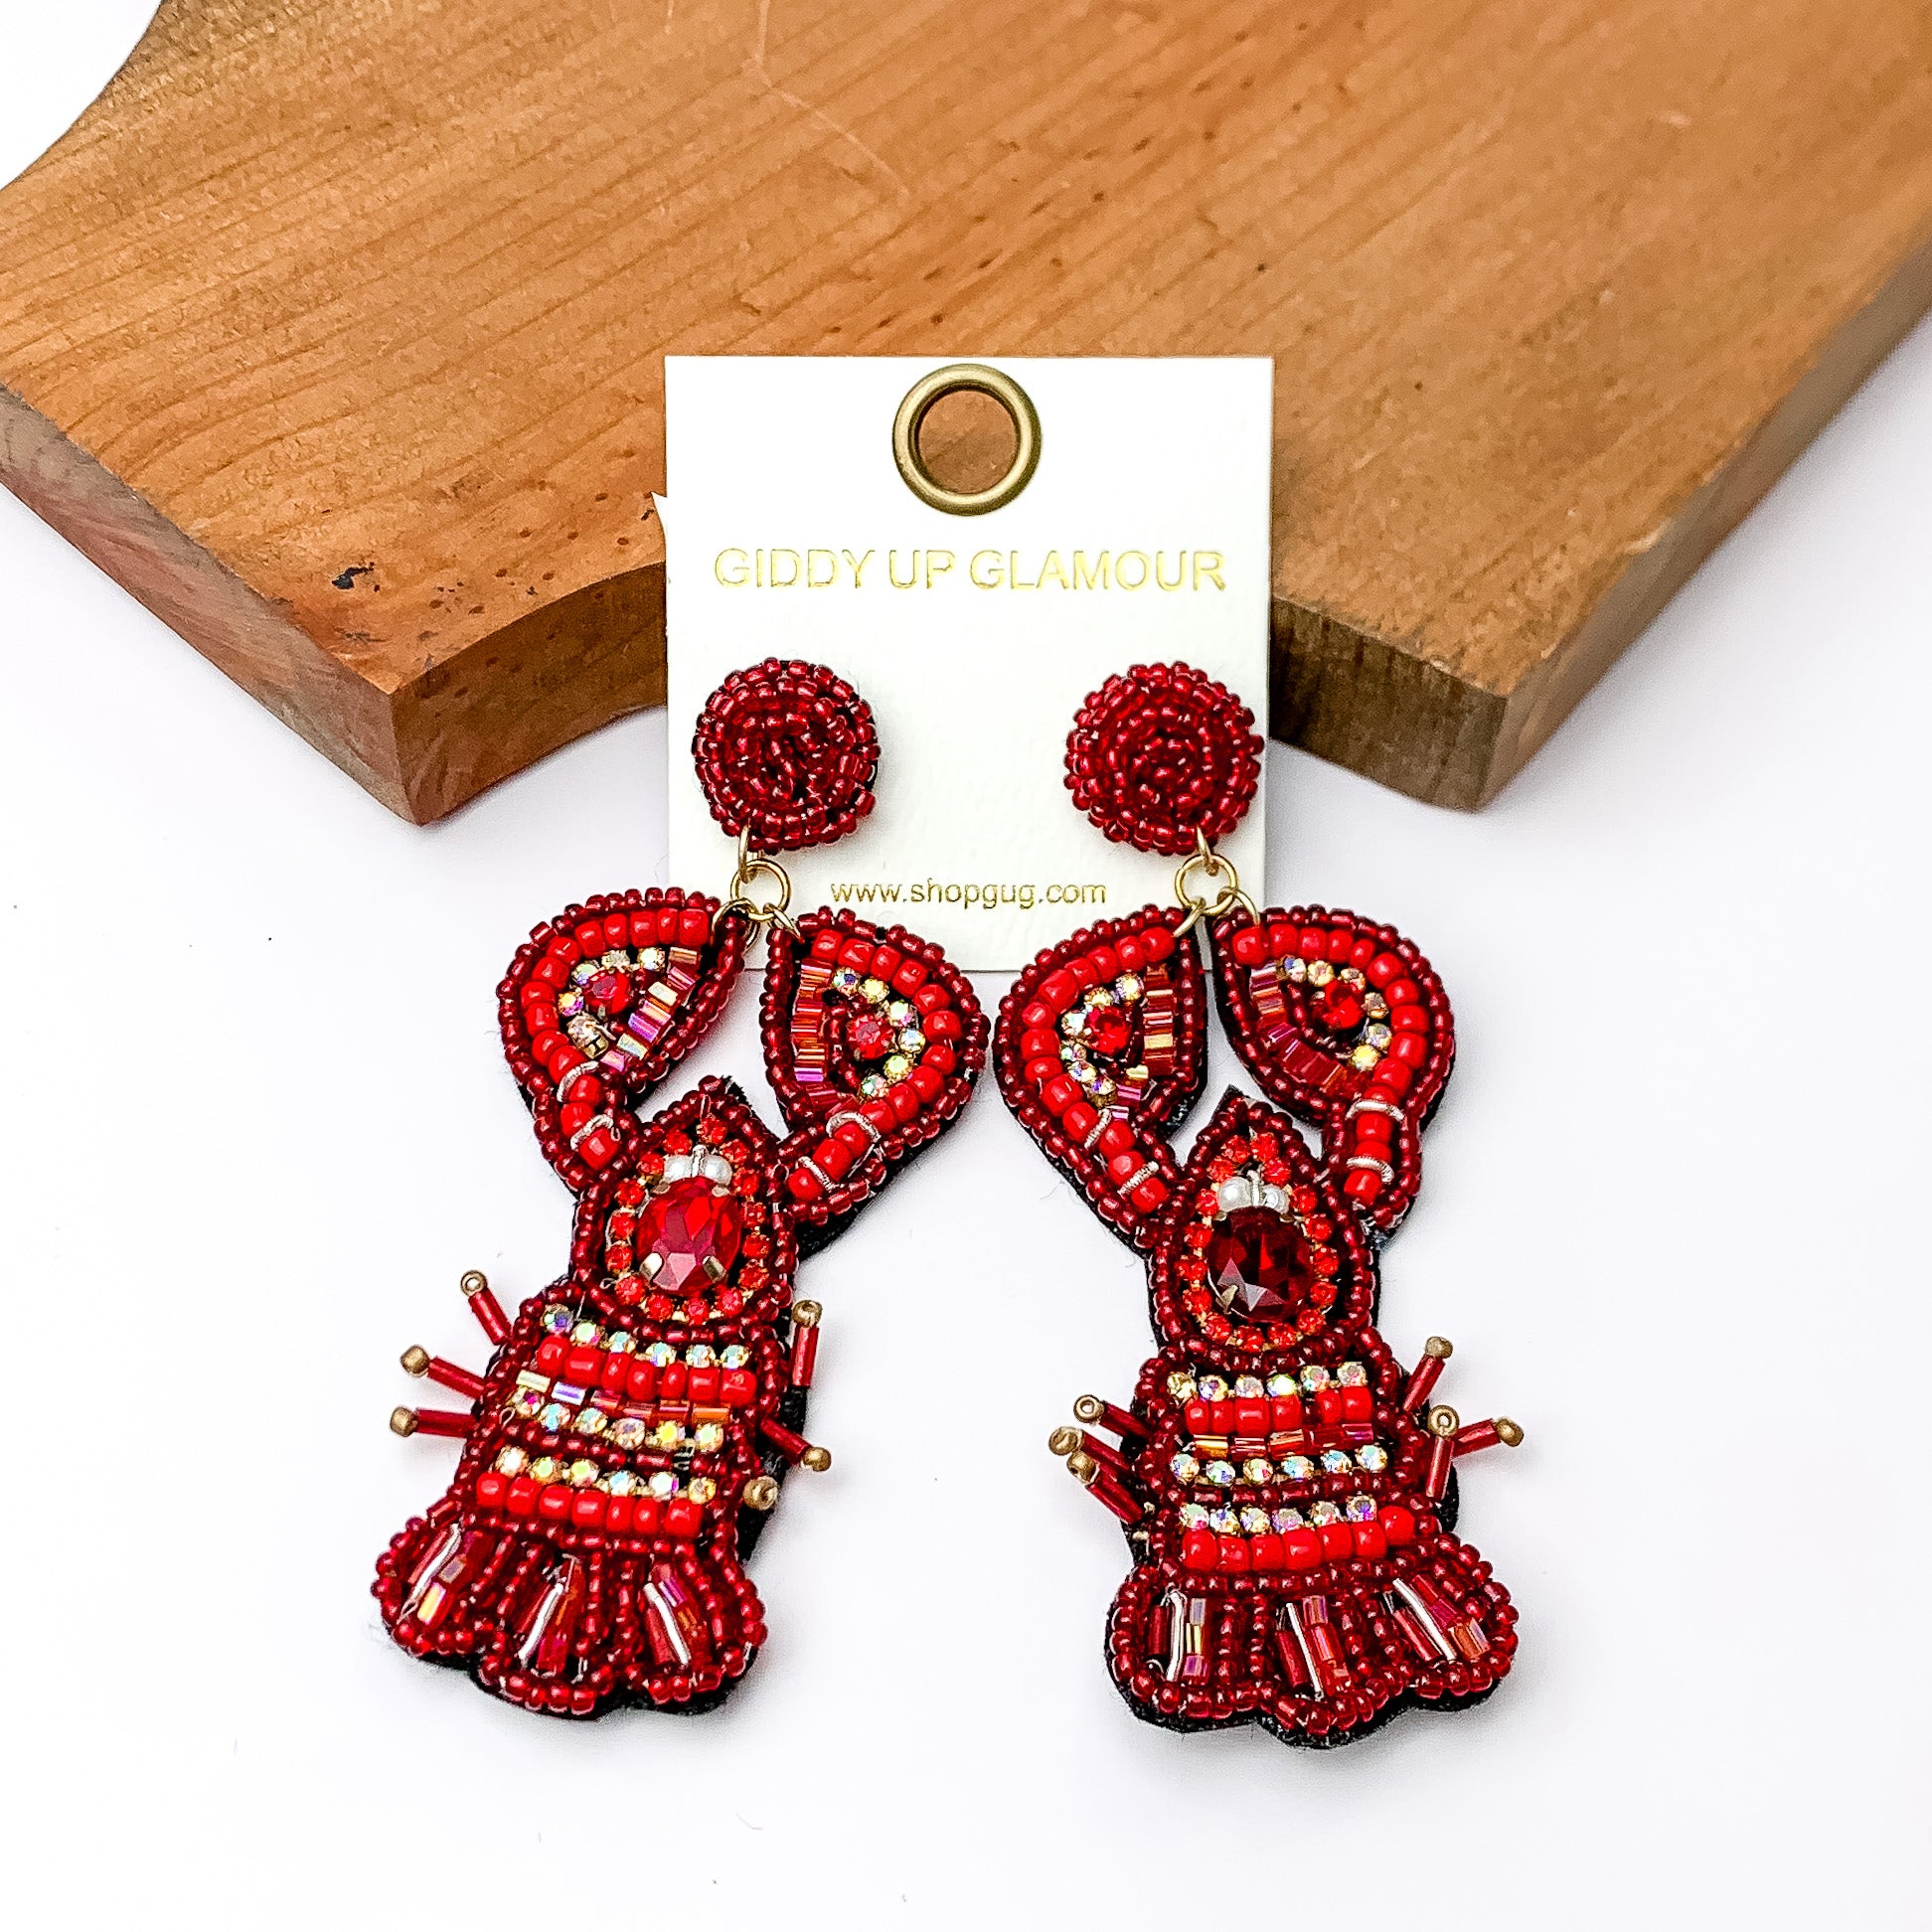 Pictured are beaded lobster earrings with red beads with ab crystal detailing. These earrings are propped up on a piece of wood with a white background.